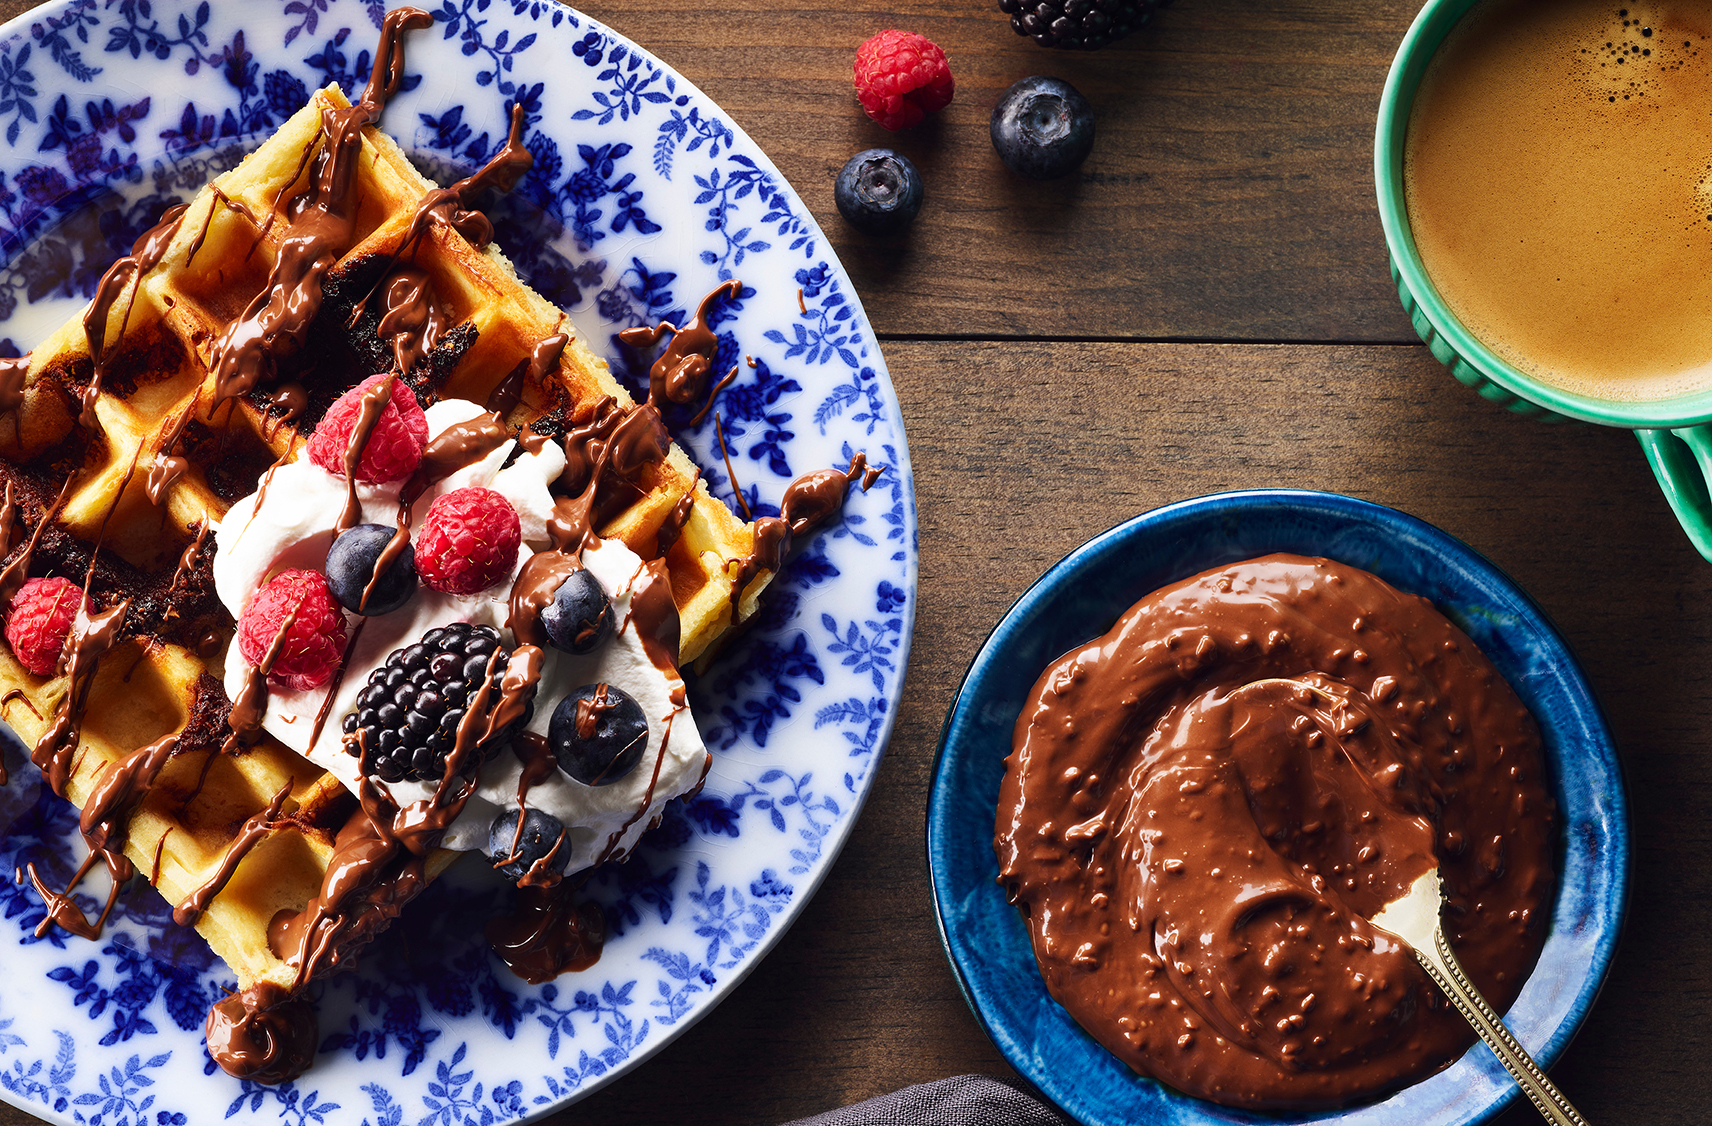 Waffle topped with chocolate hazelnut spread, whipped cream and fruit
